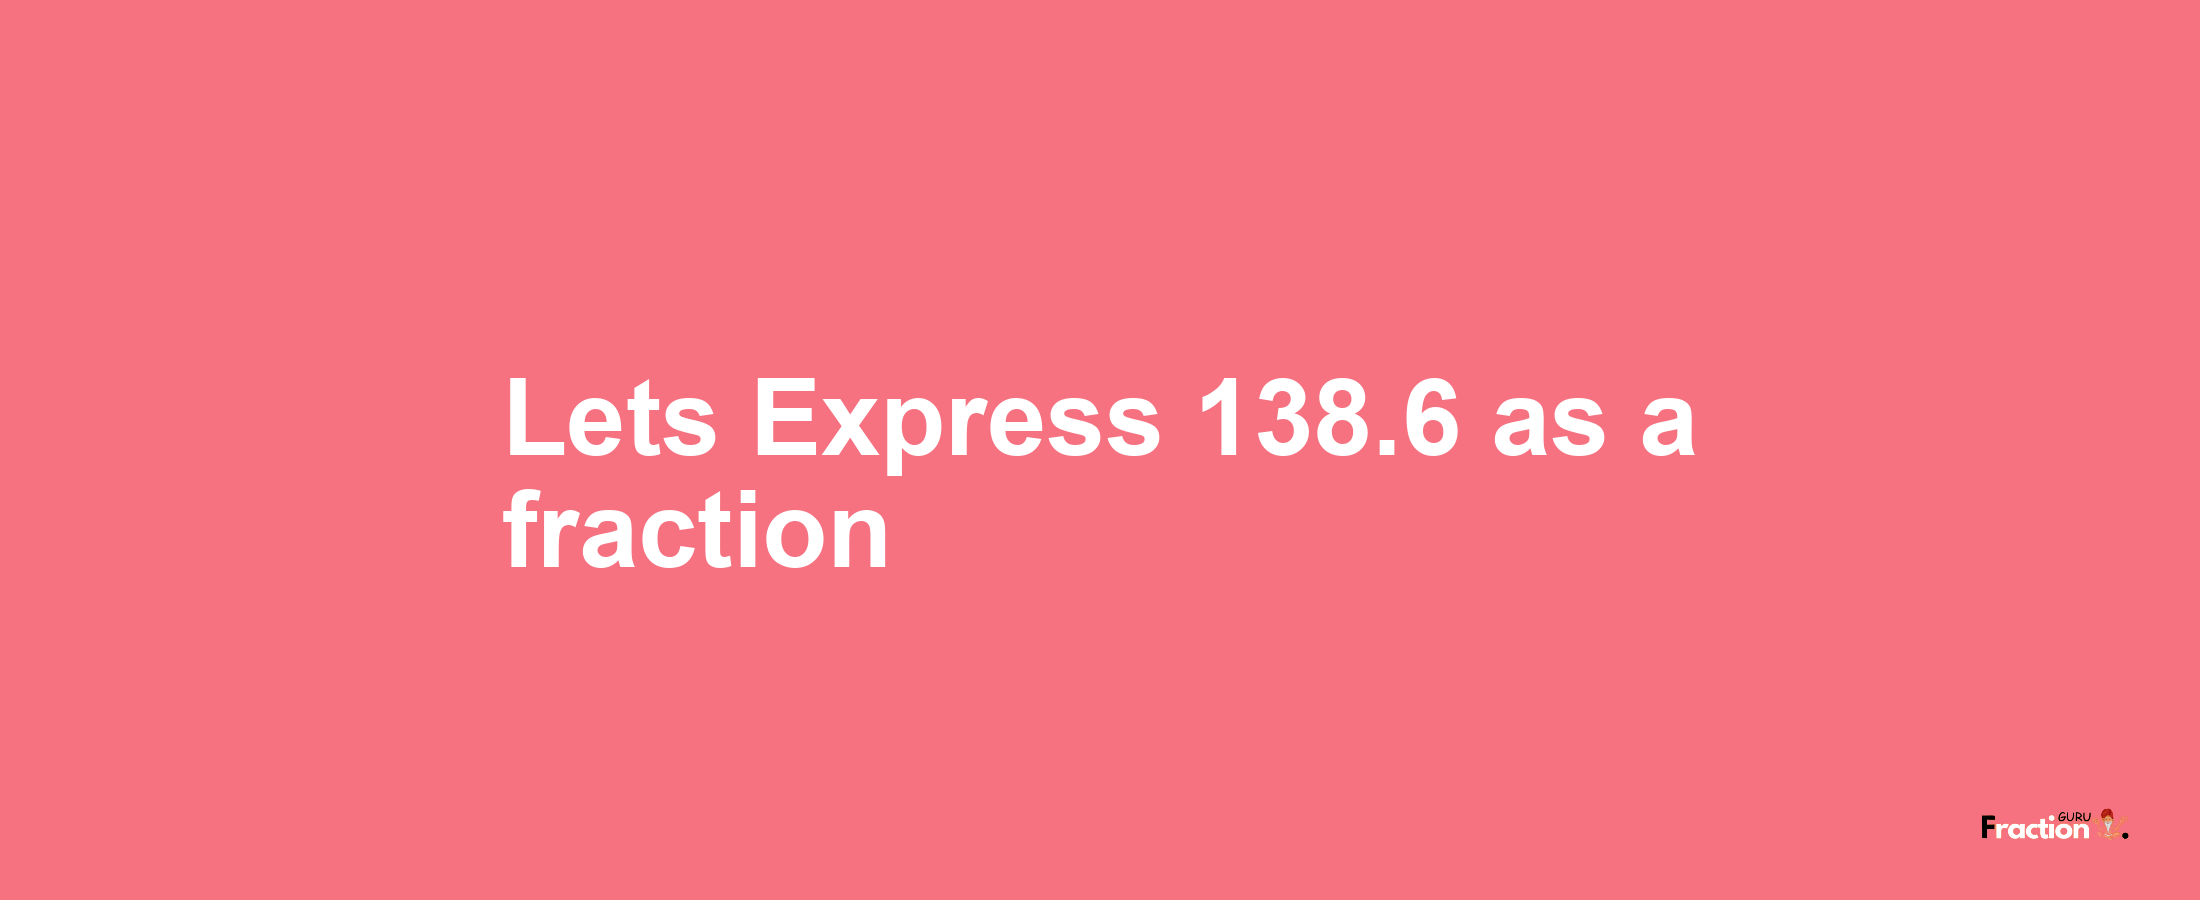 Lets Express 138.6 as afraction